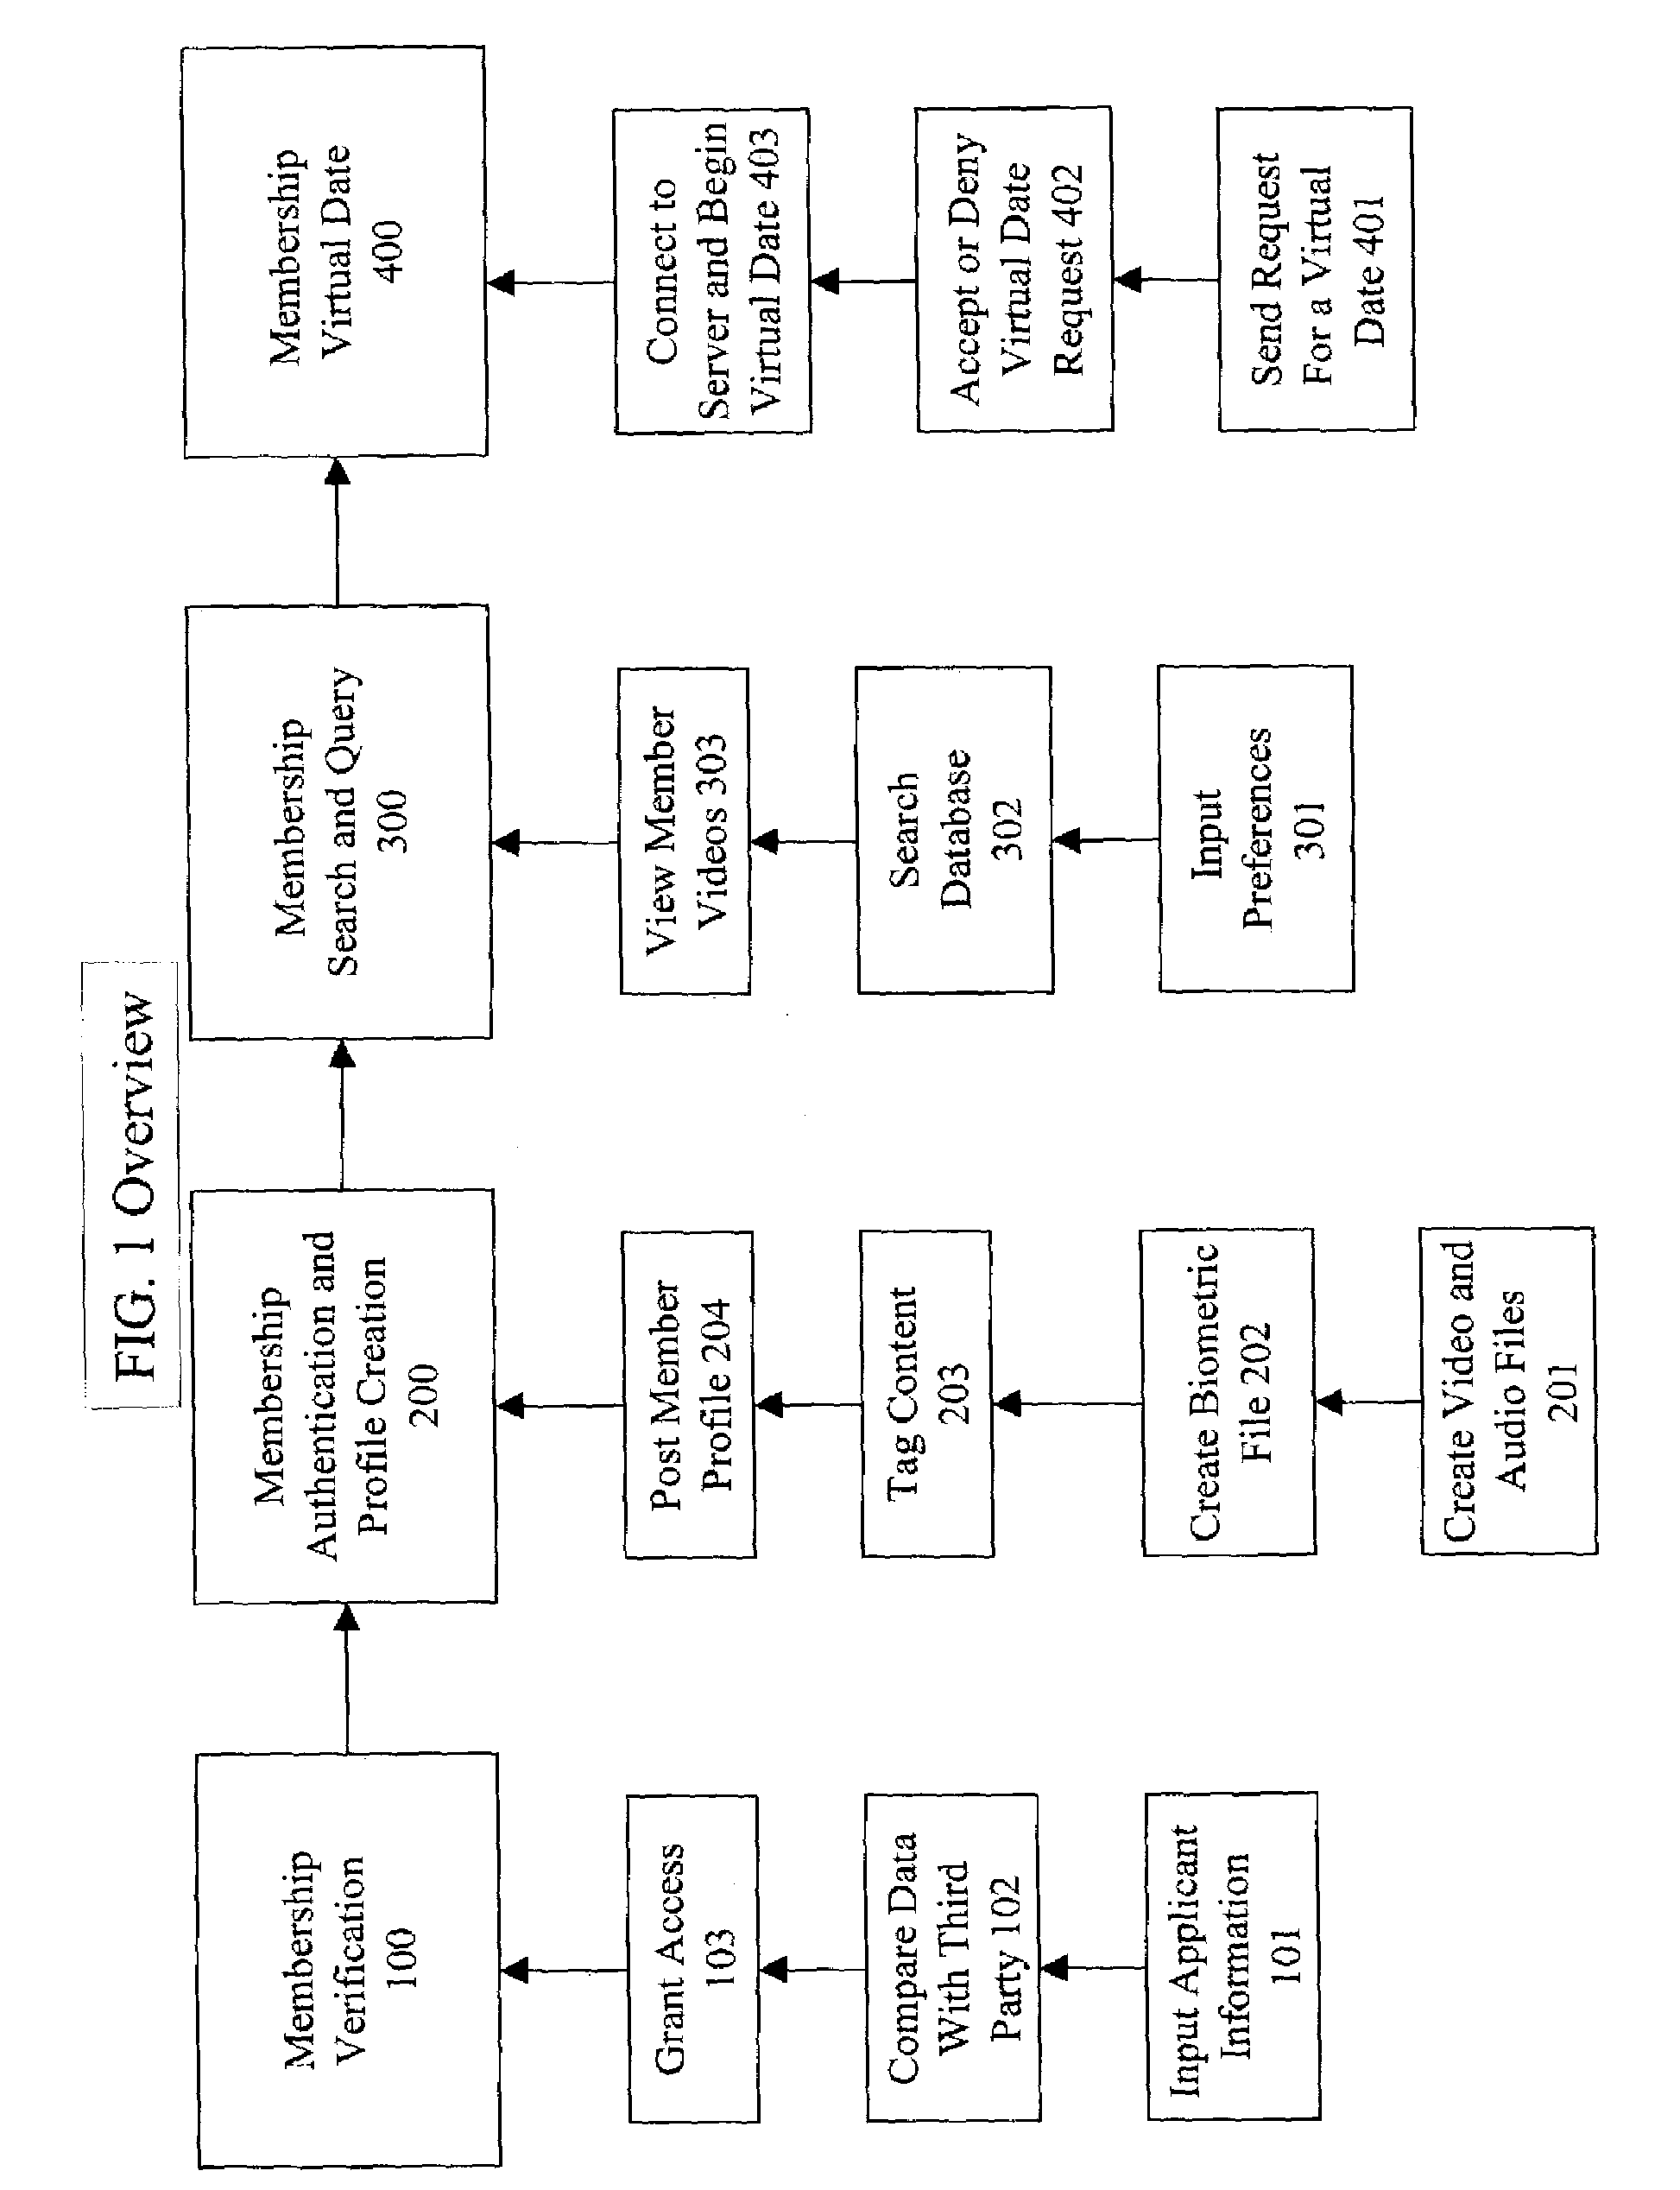 Method for user verification and authentication and multimedia processing for interactive database management and method for viewing the multimedia